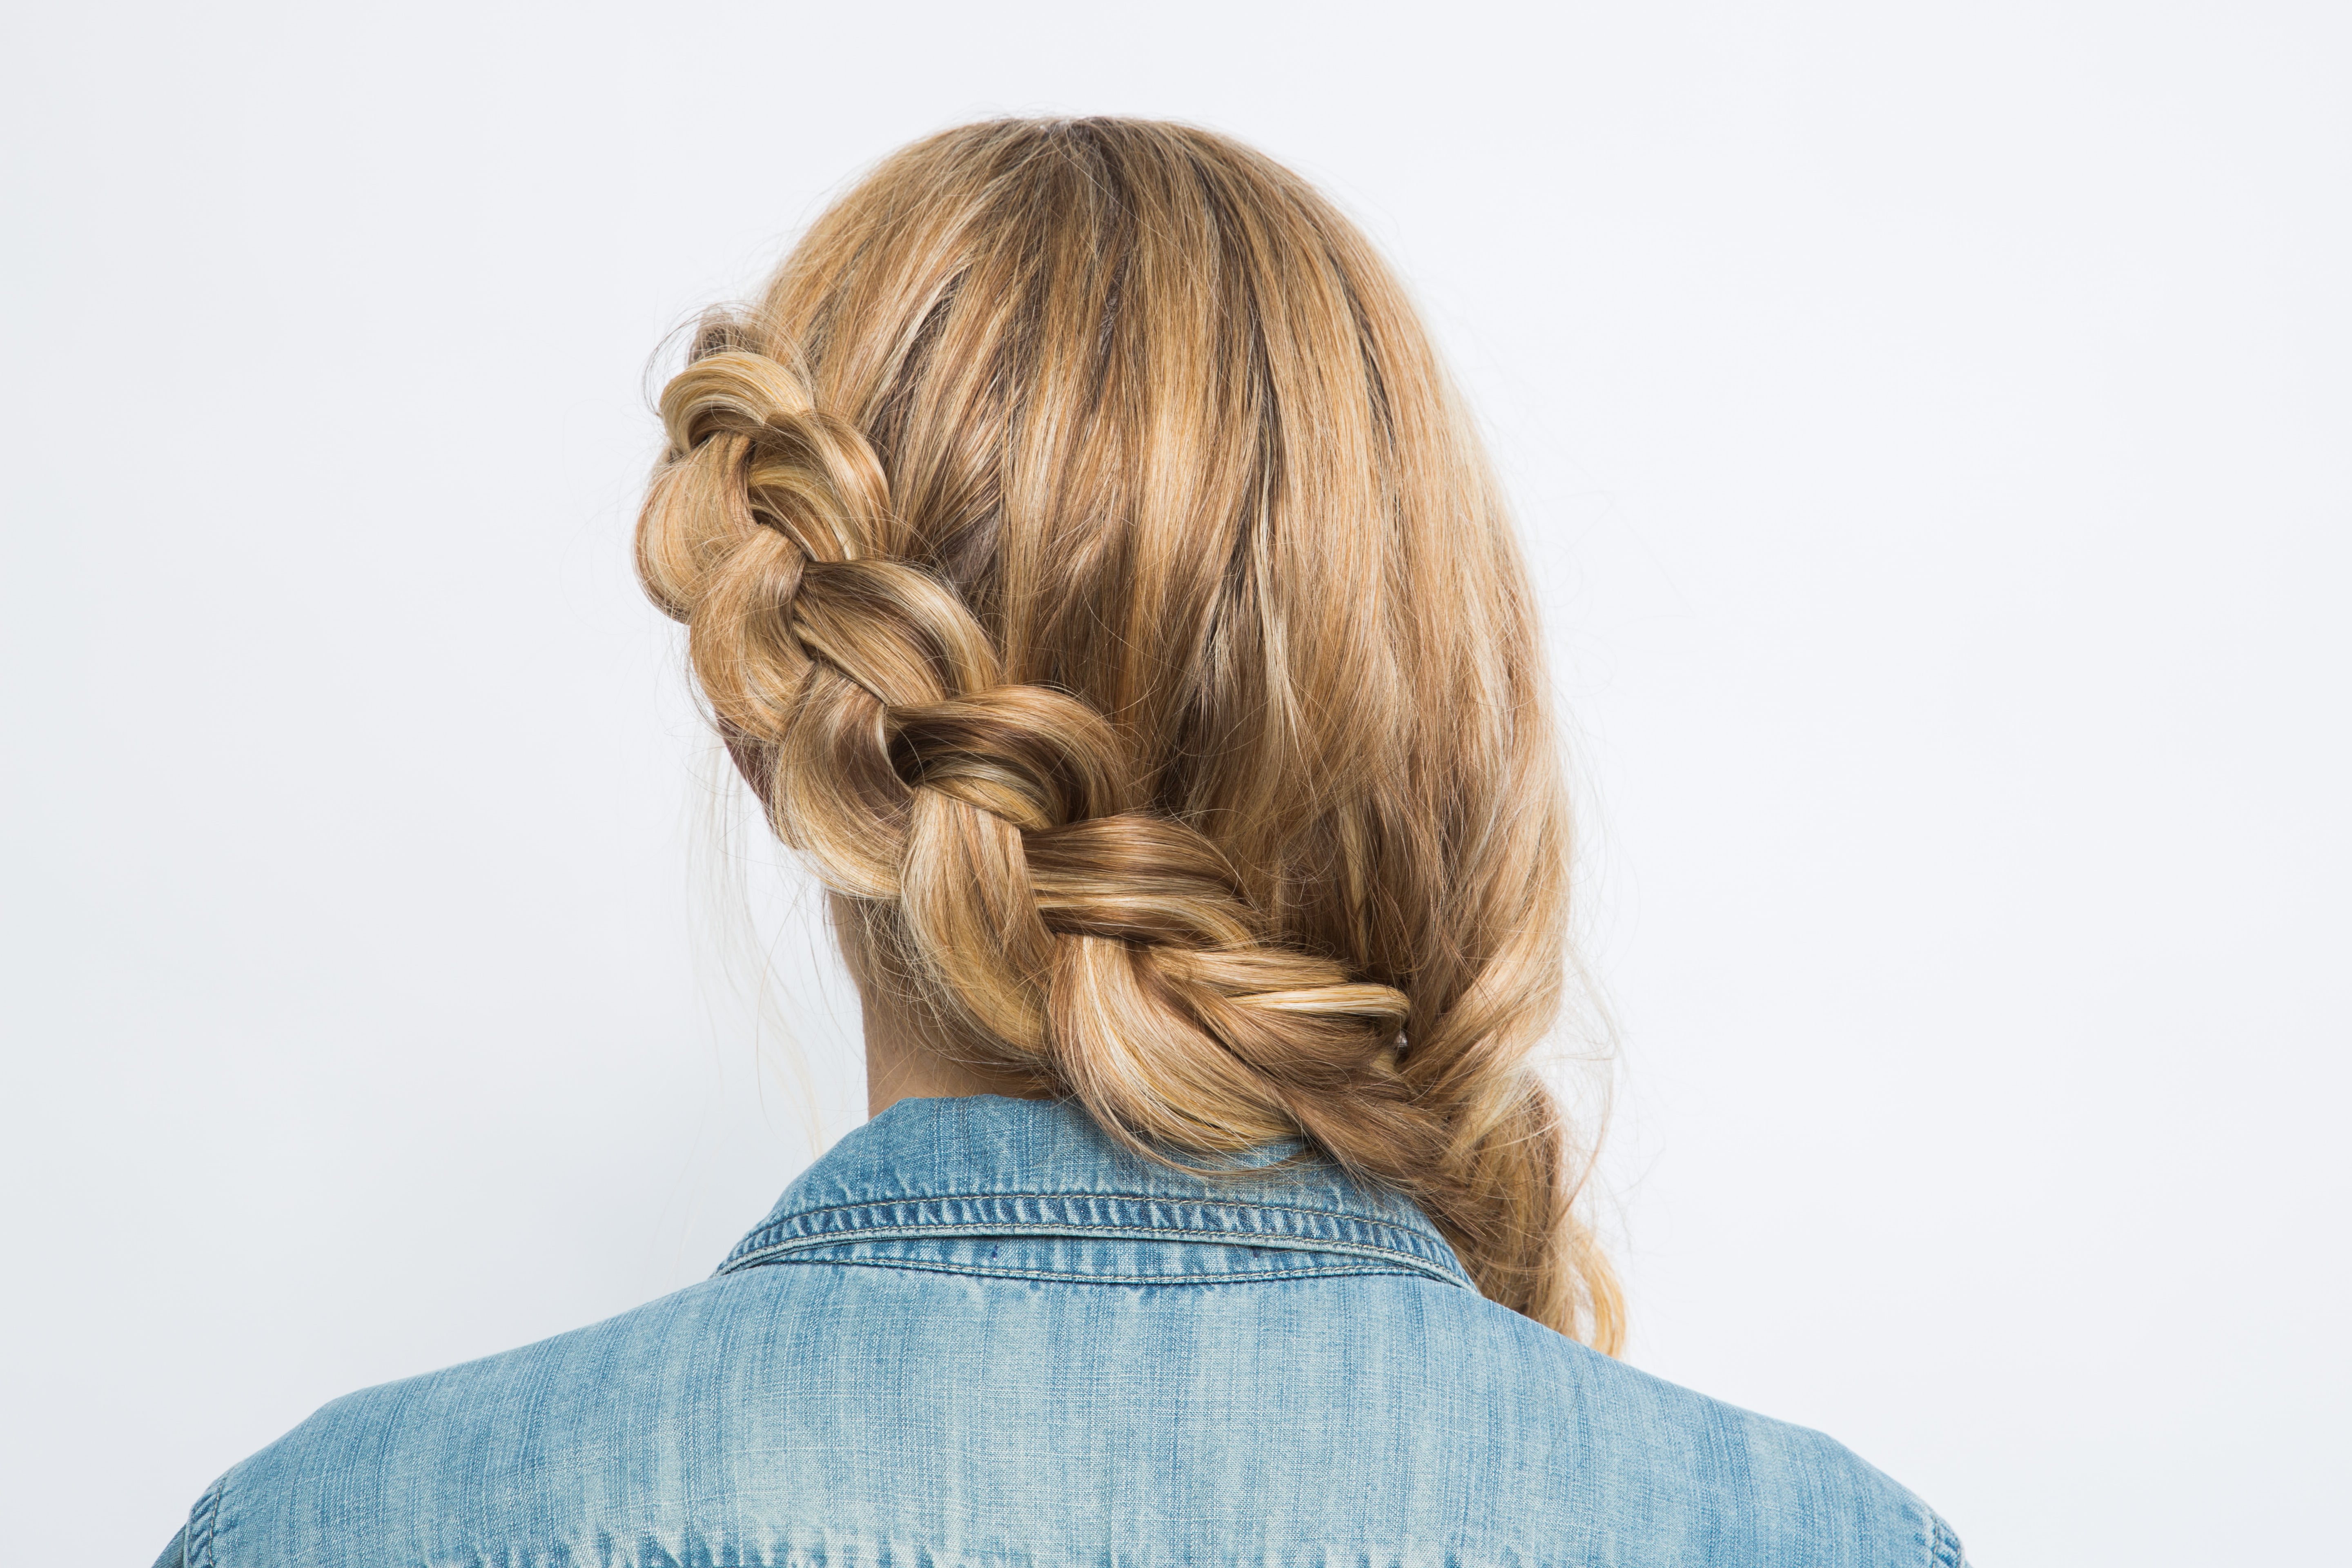 Braiding 101: Tips and Tricks to Master Your Technique